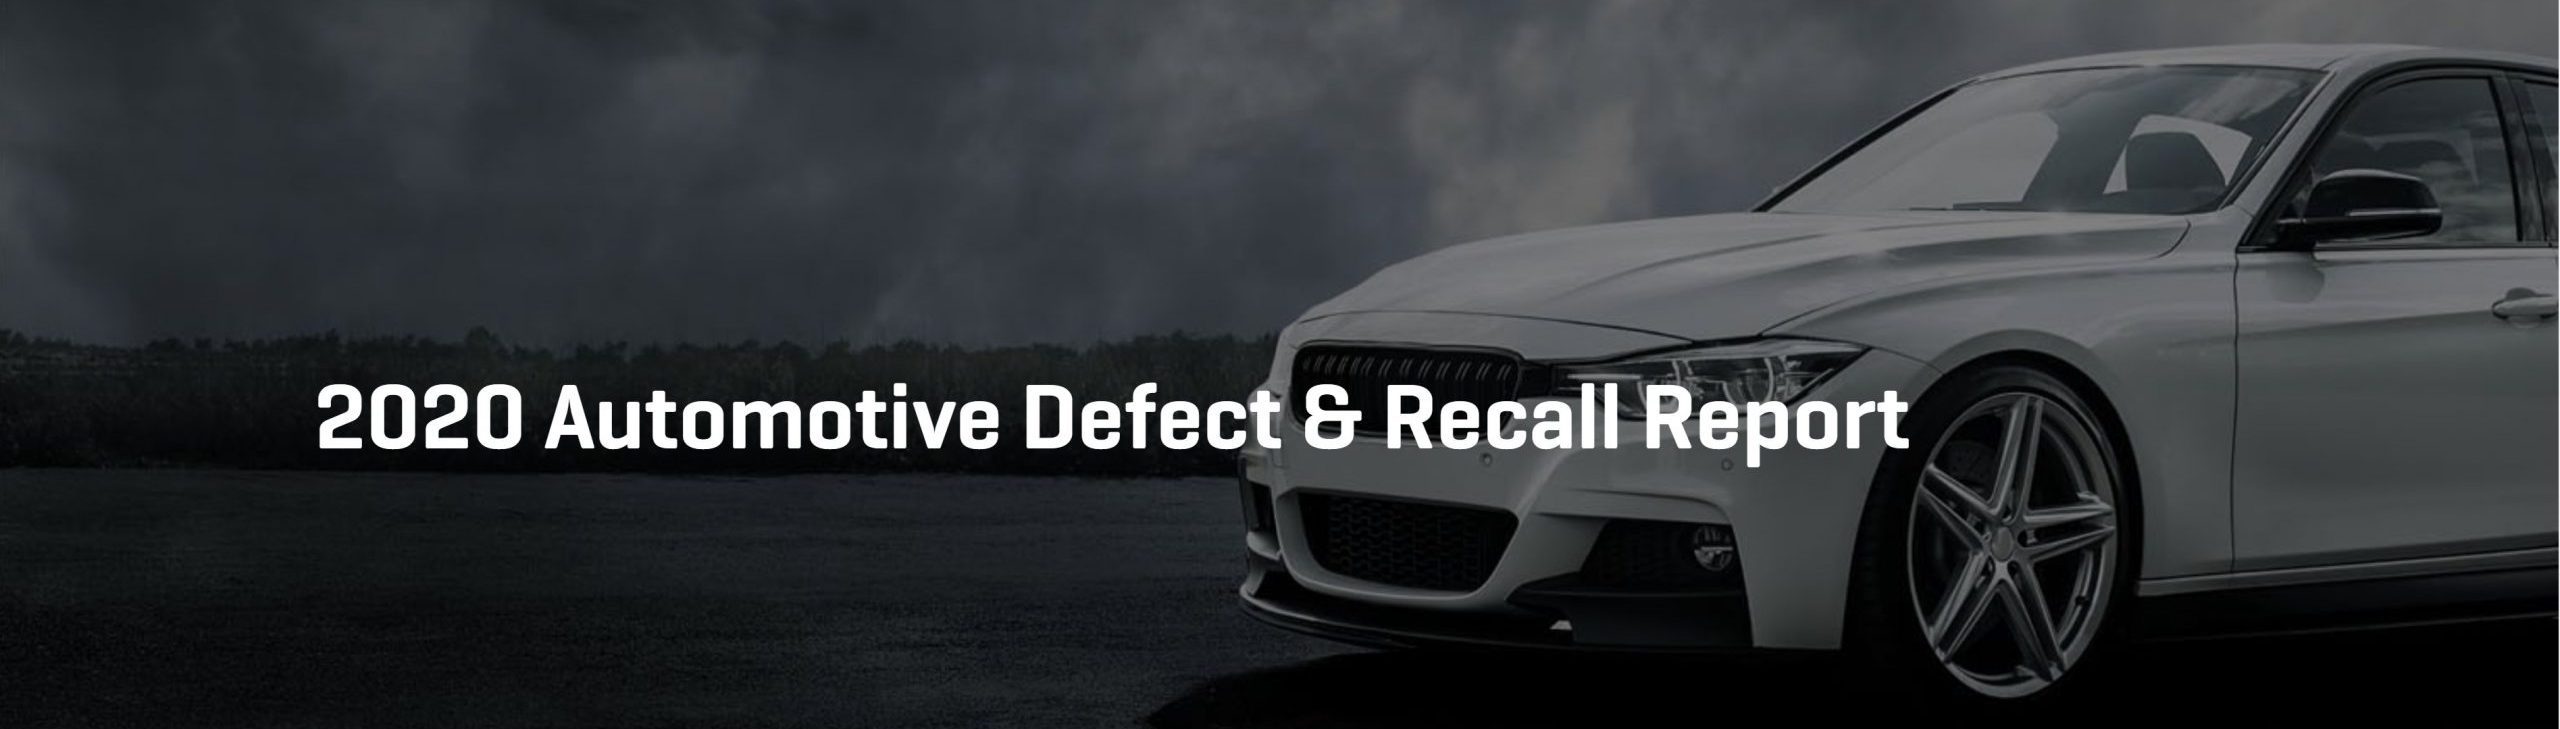 Stout’s 2020 Automotive Defect & Recall Report is a wakeup call!